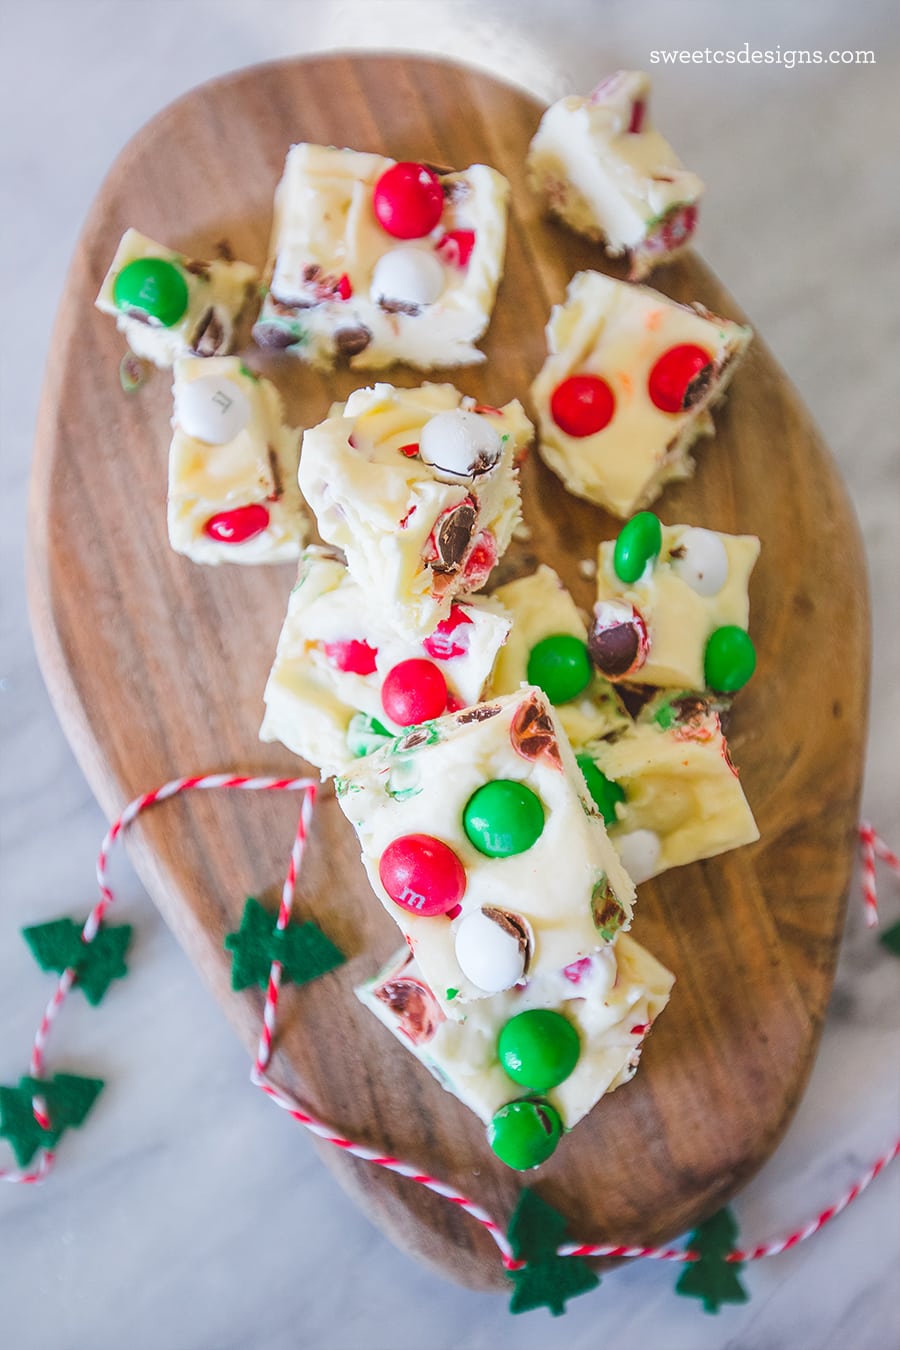 Cookie dough fudge with Christmas candy- my favorite!